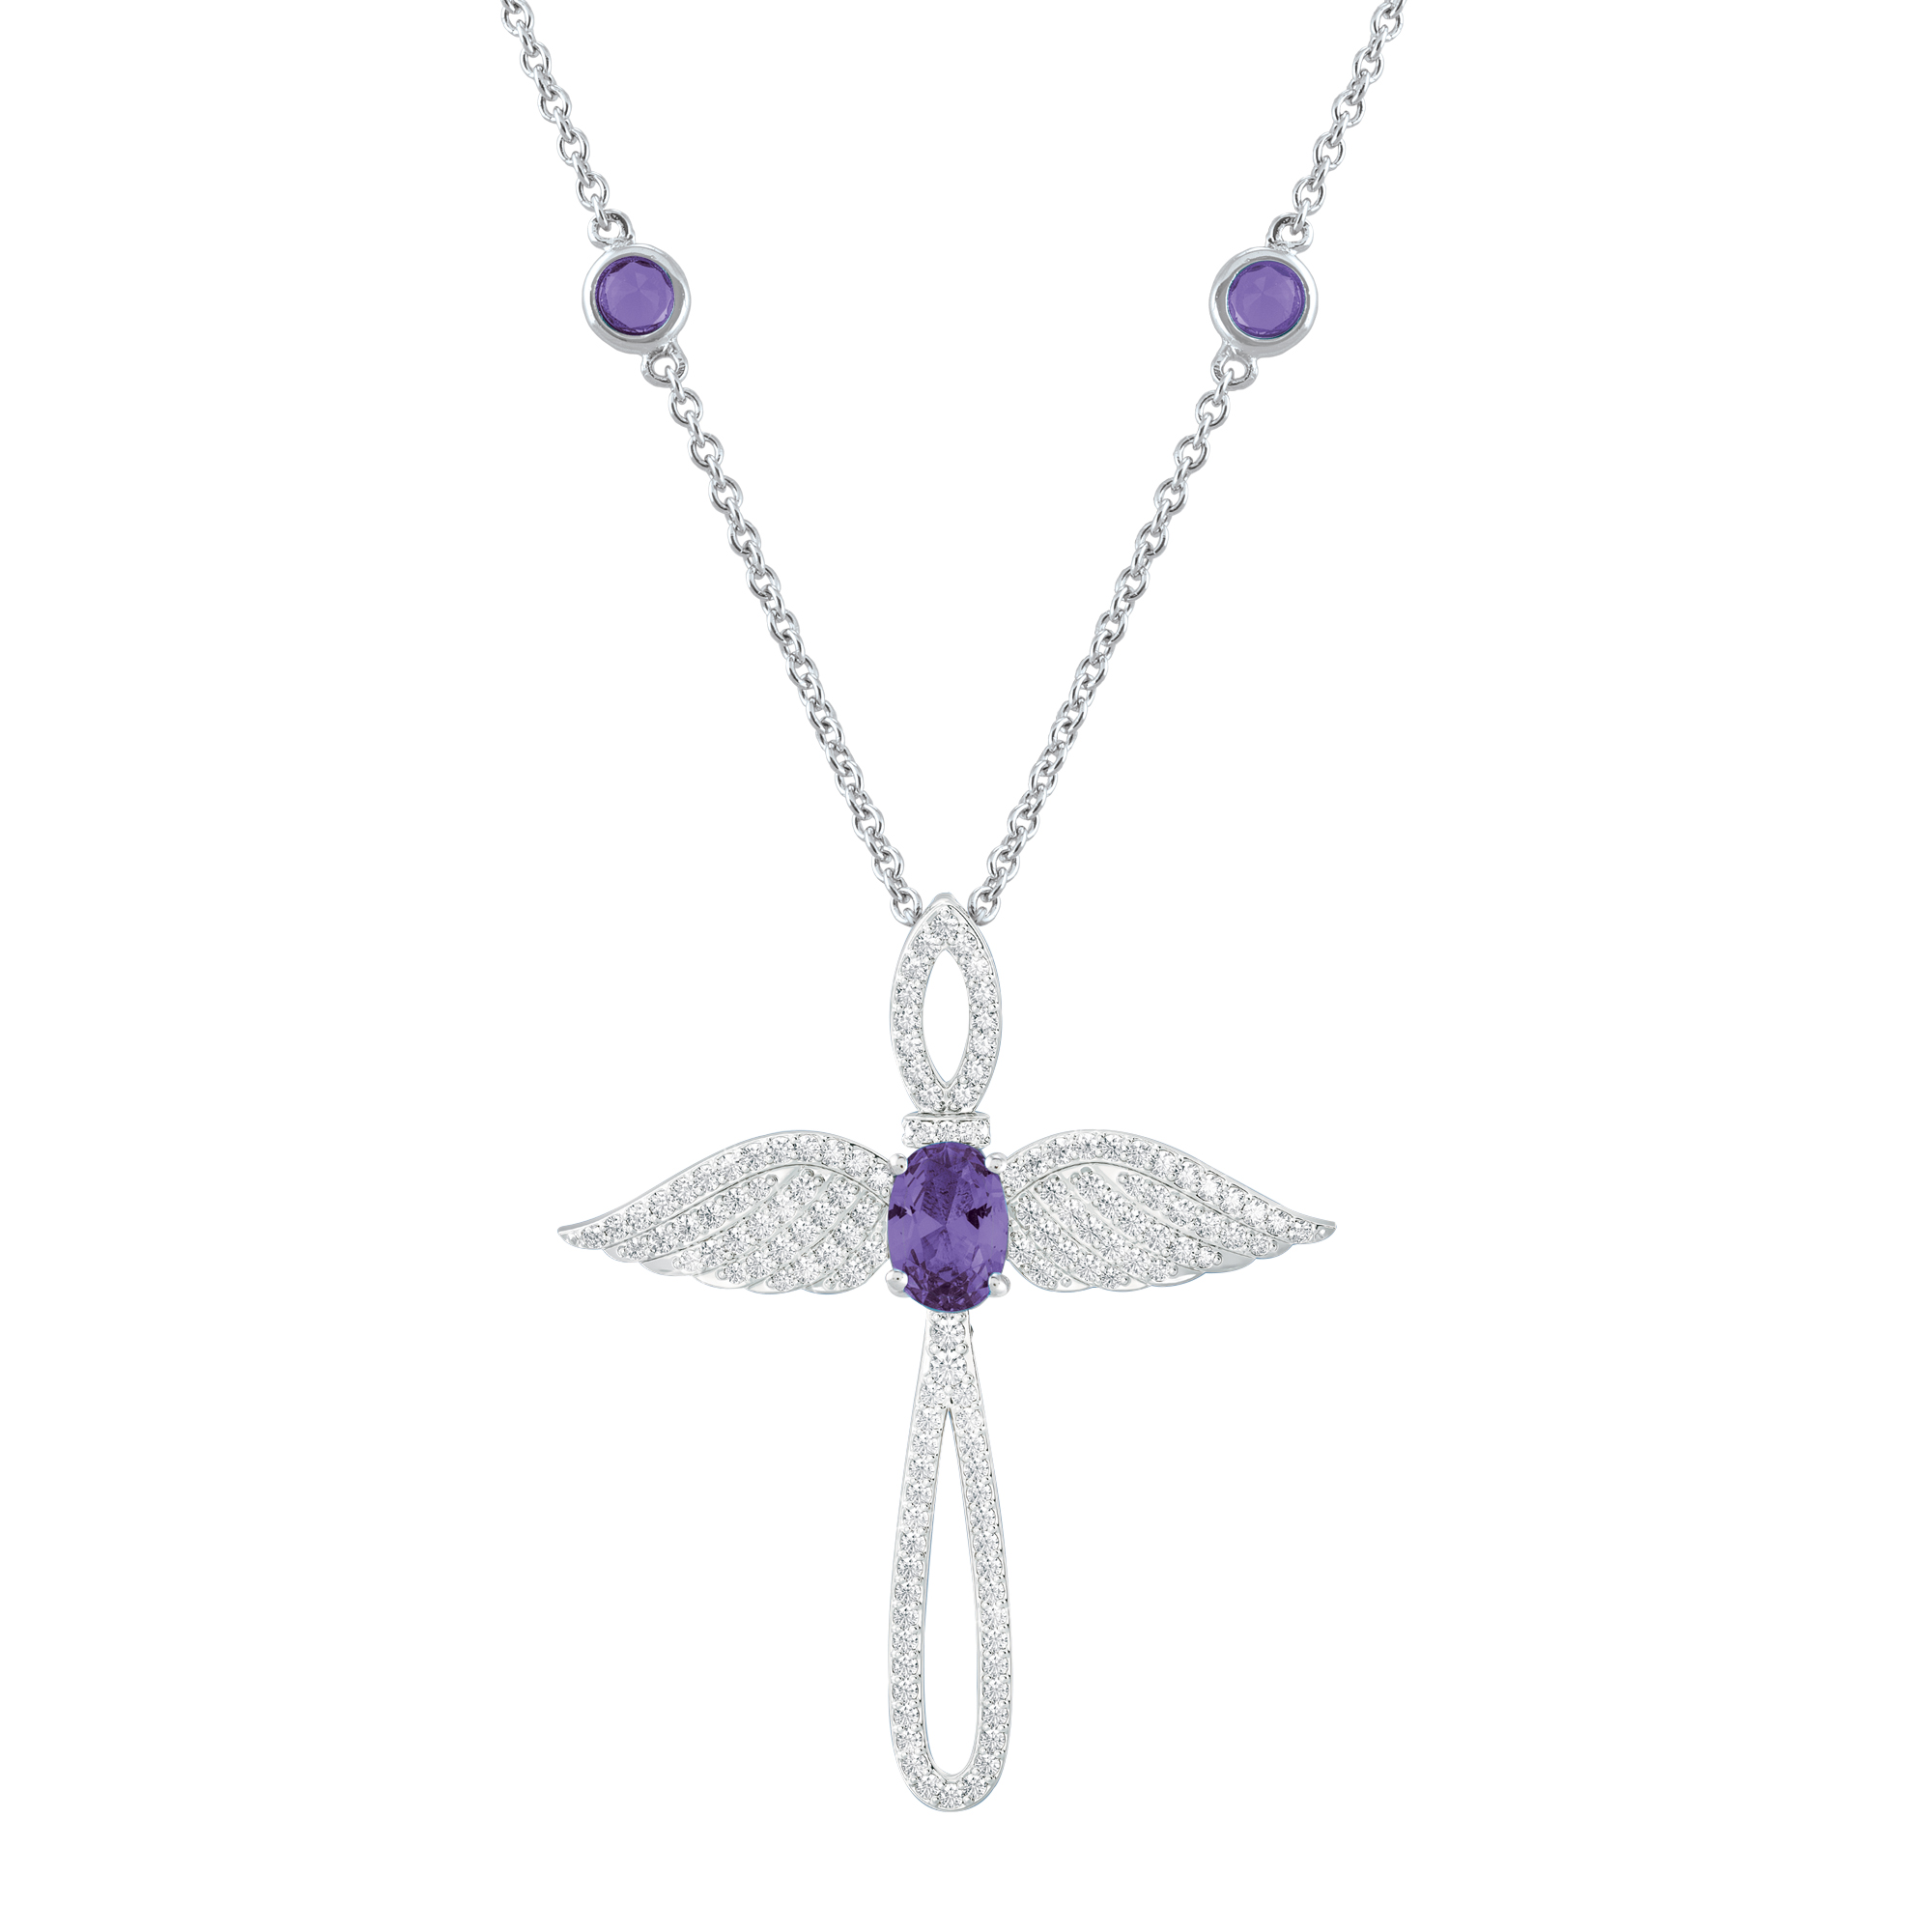 Touched by an Angel Birthstone Necklace 6842 0017 a main